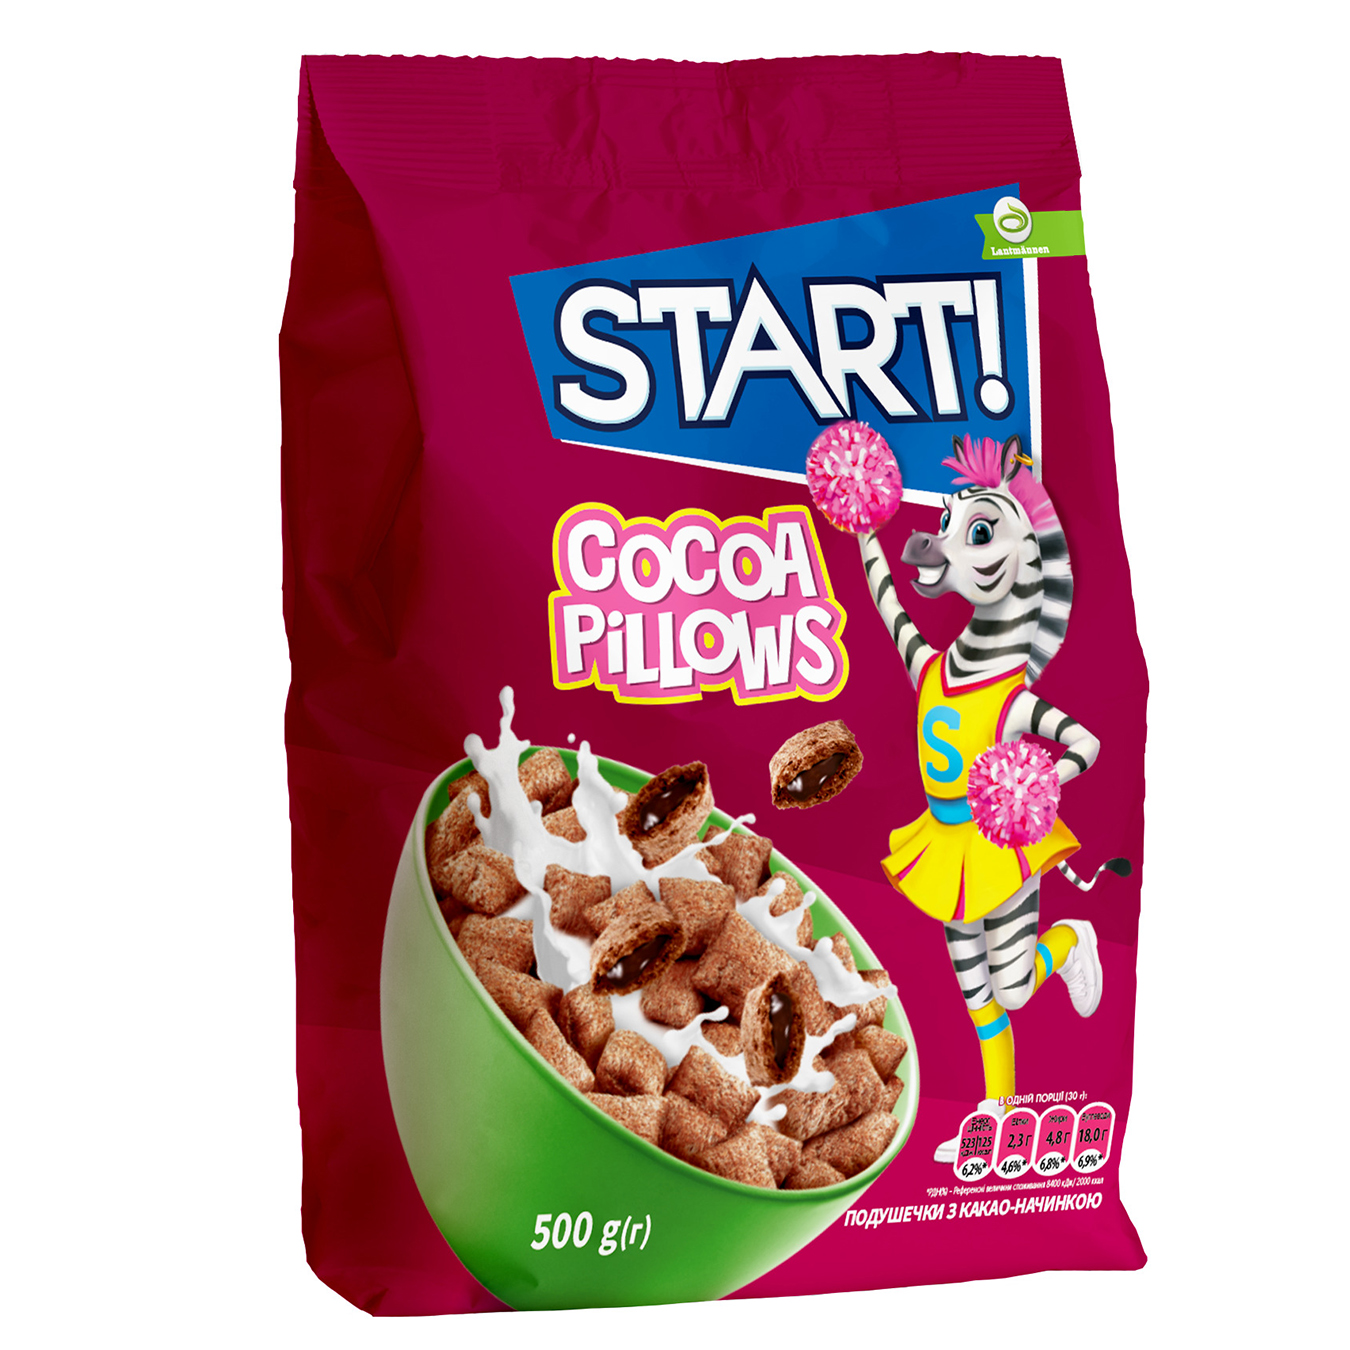 Start! With Cocoa Filling Grain Pillows Dry Breakfast 500g